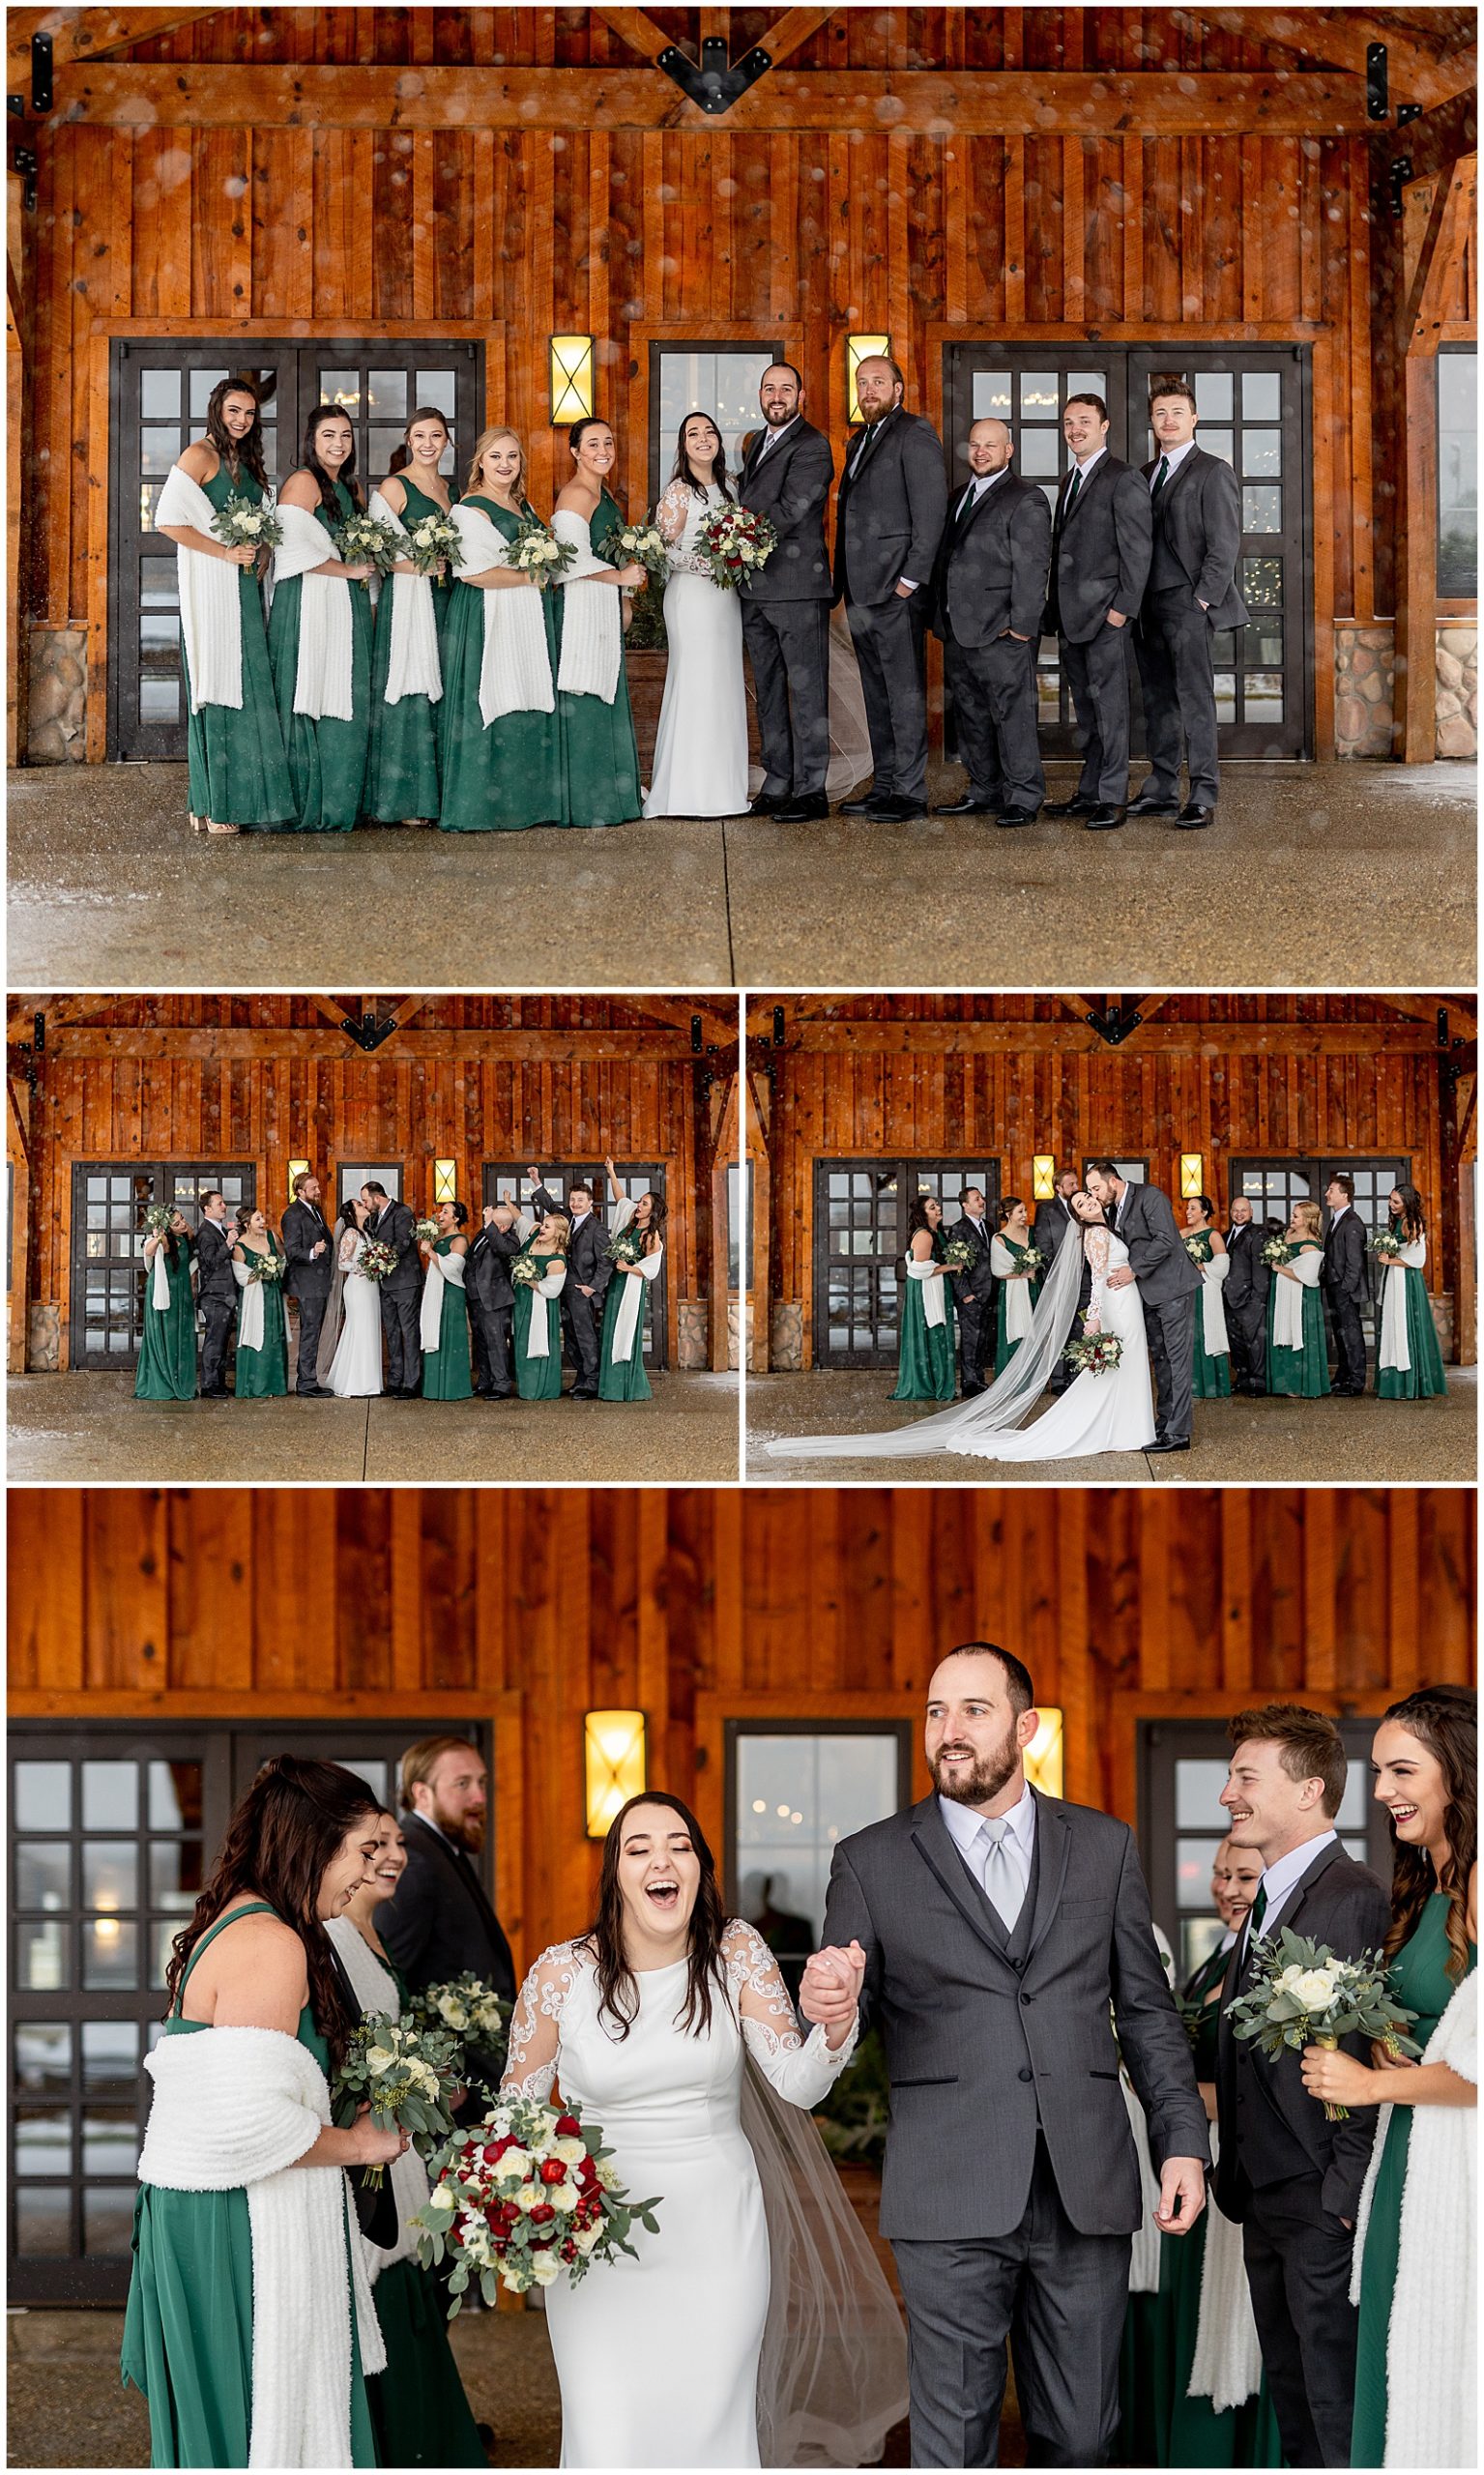 Winter Wedding at Country Celebrations Sioux CIty Iowa